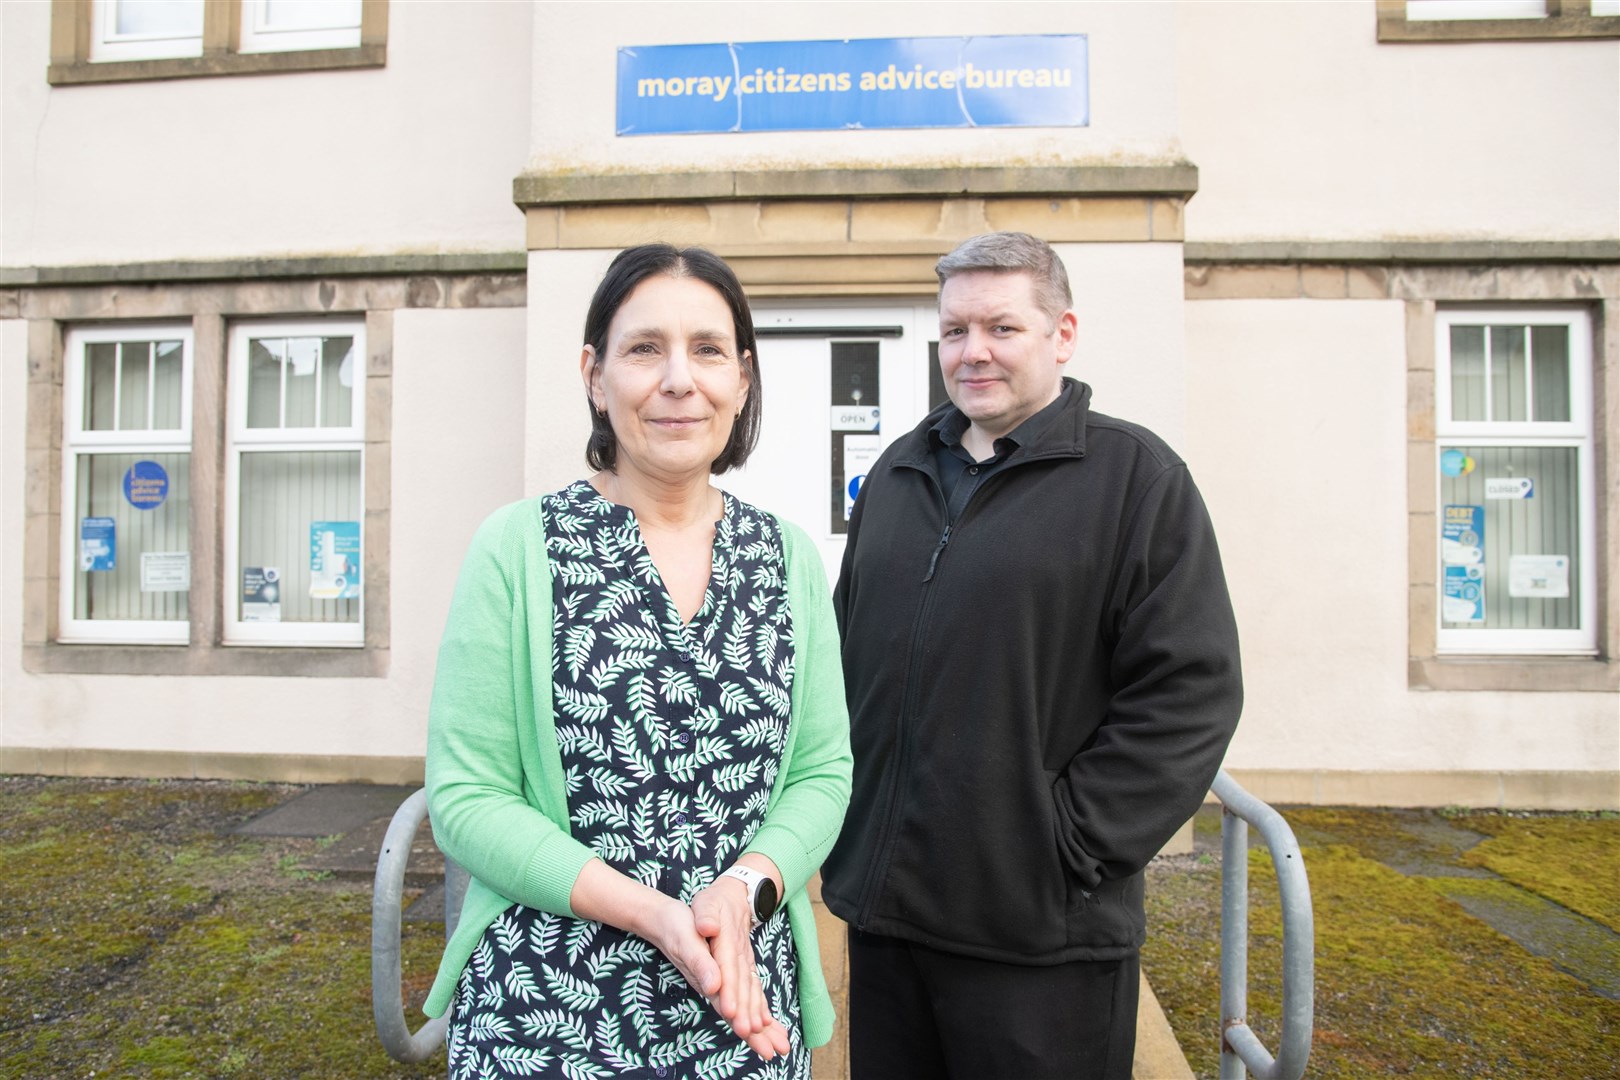 Mary Riley and Rob Morrison, manager and deputy manager of the Moray Citizens Advice Bureau...Picture: Daniel Forsyth.